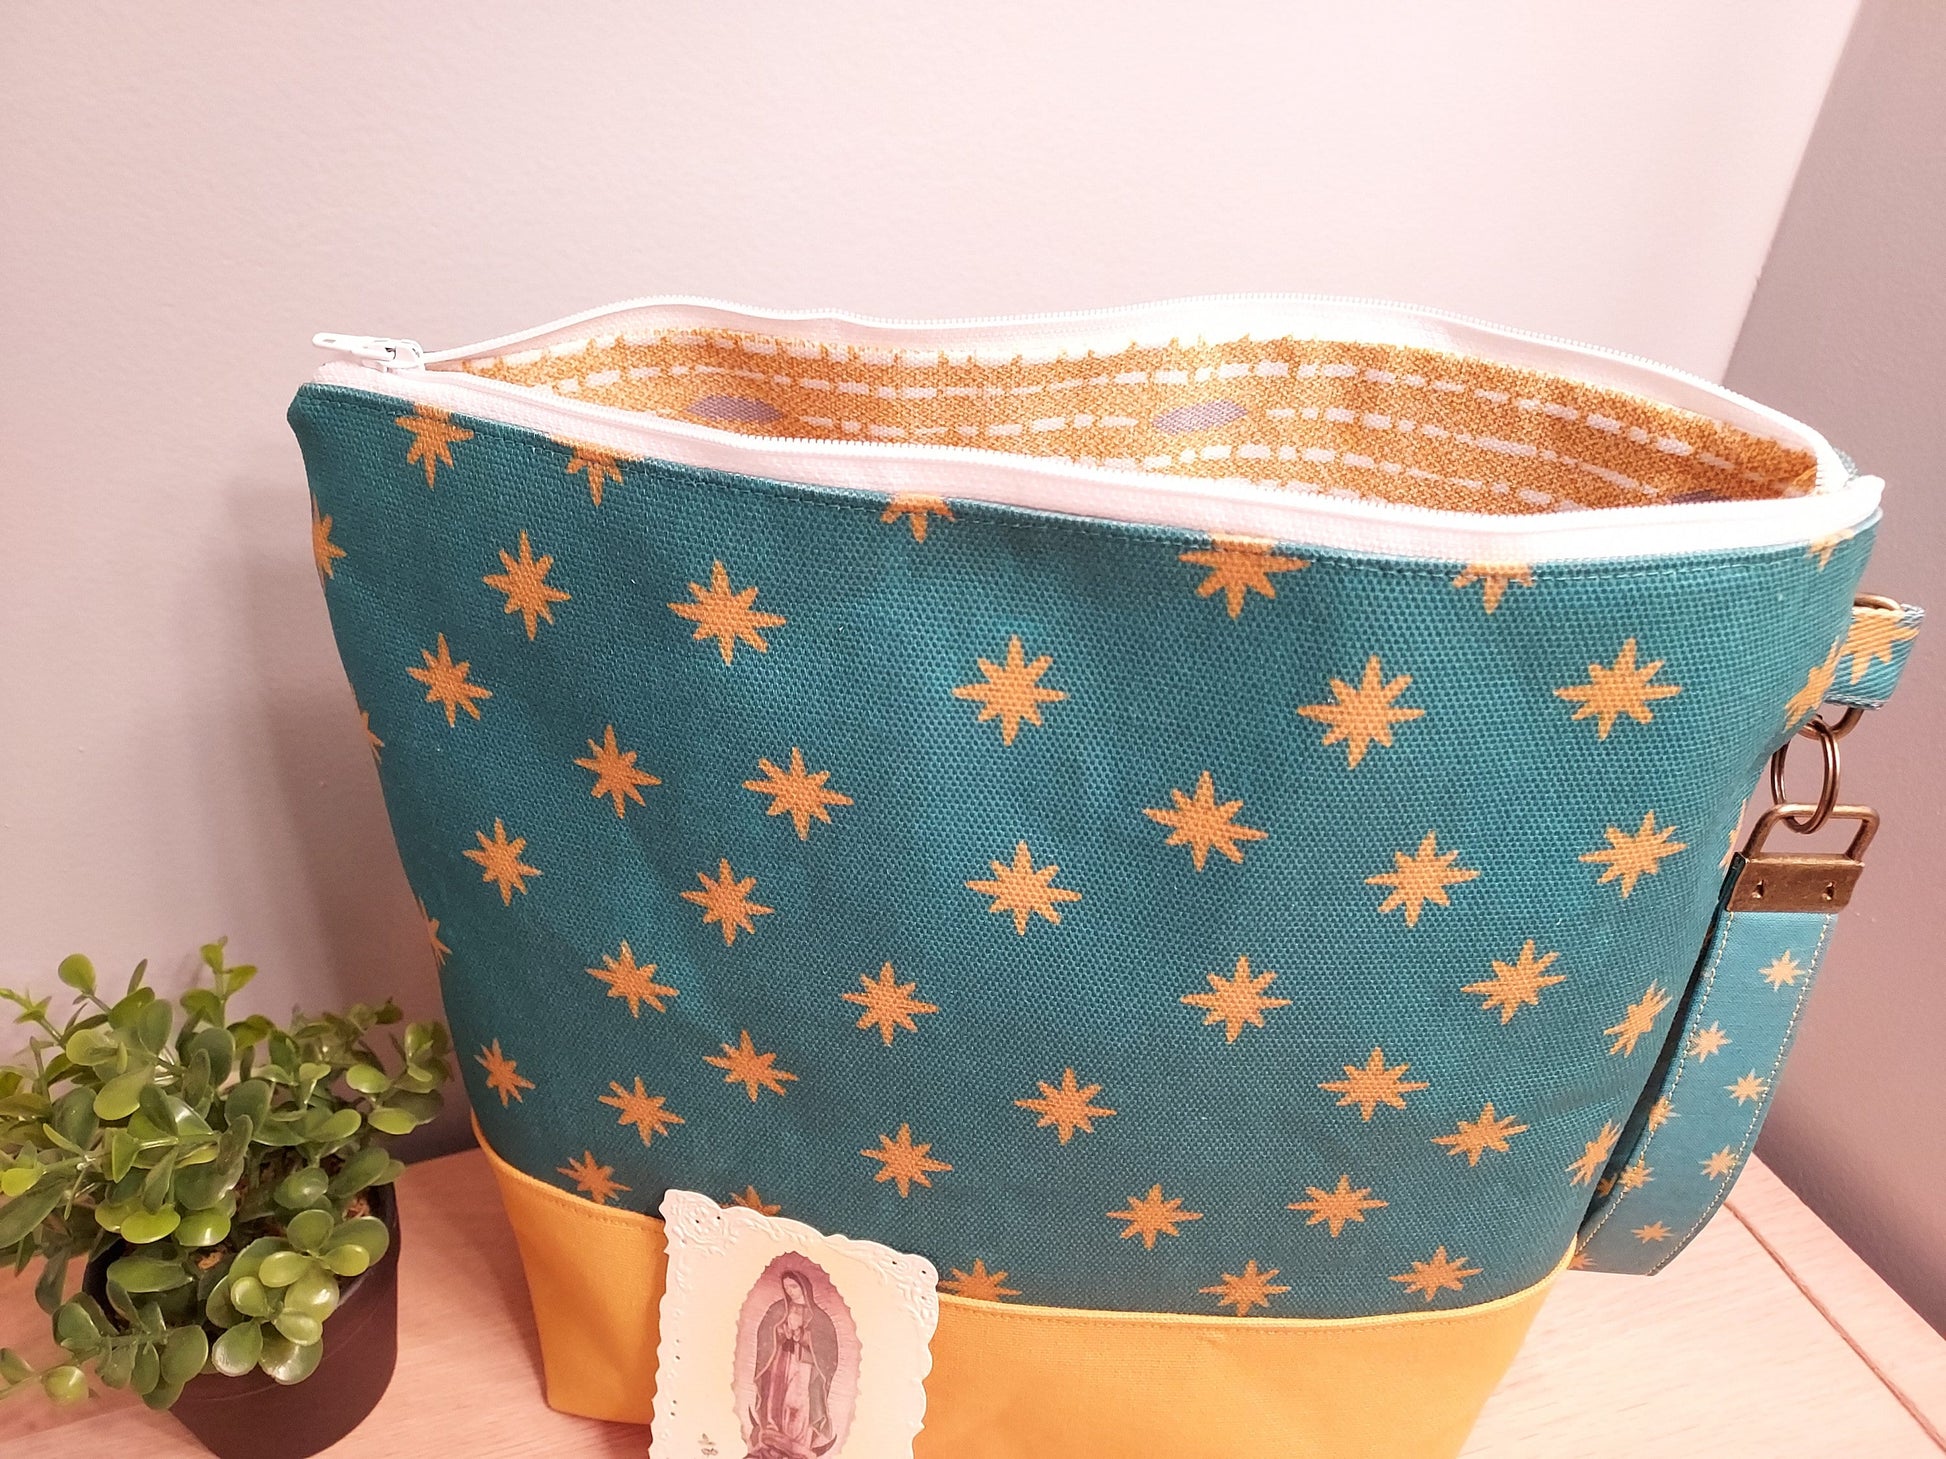 Clutch with Wristlet Our Lady of Guadalupe Catholic fabric Limited Edition Christian Confirmation Bible Purse Bag Handmade w/ zipper